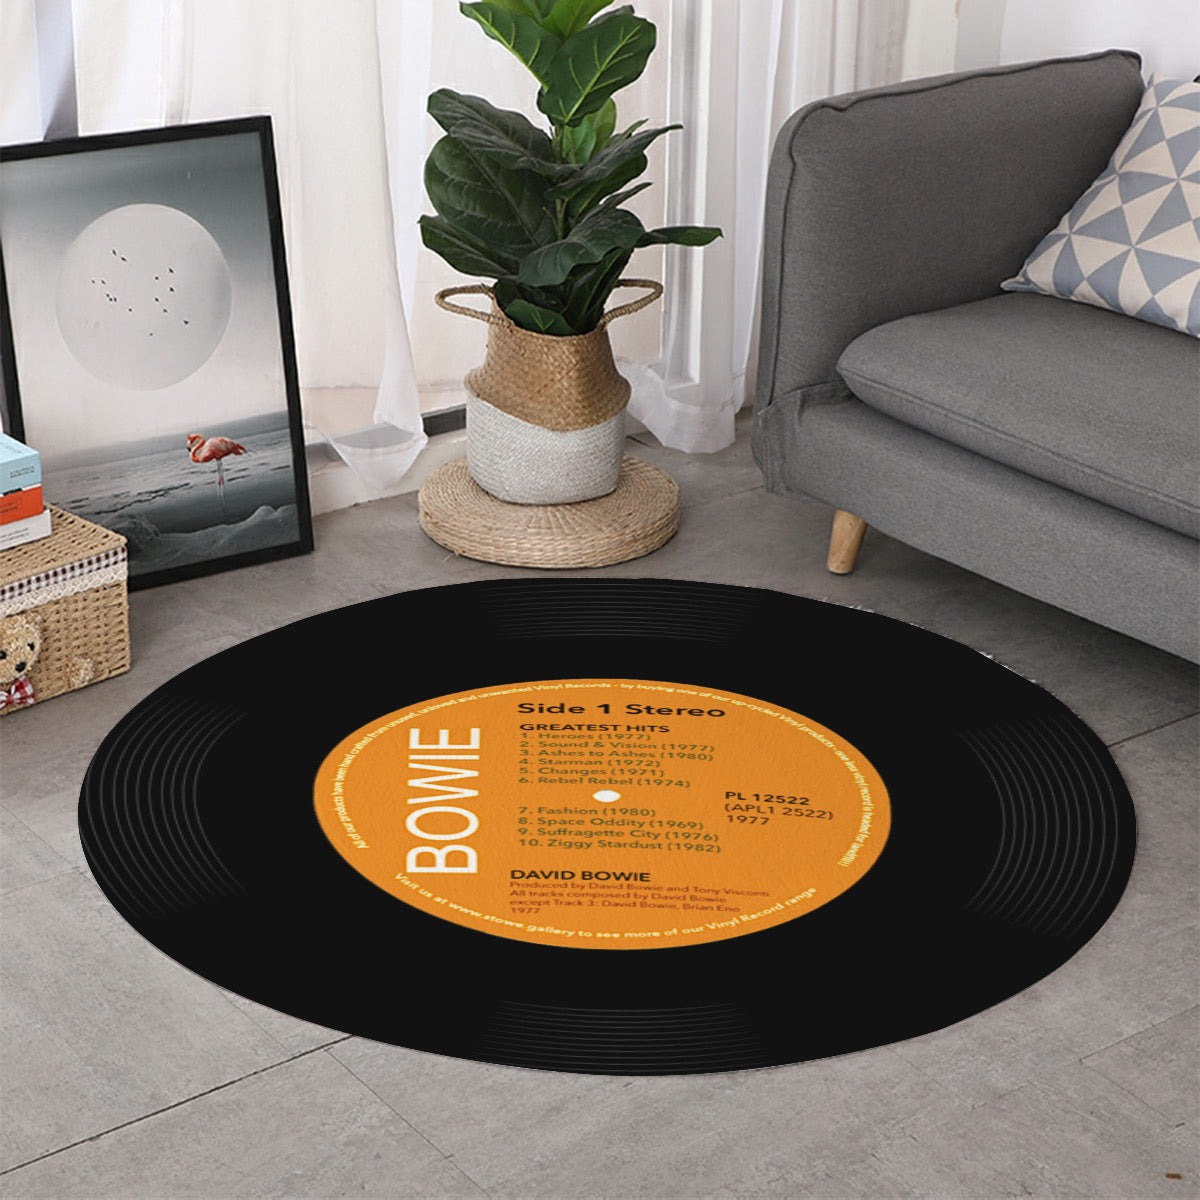 David Bowie, Greatest Hits, Vinyl Record Round Mat (Can also be used as sound Damper on wall - Posterify